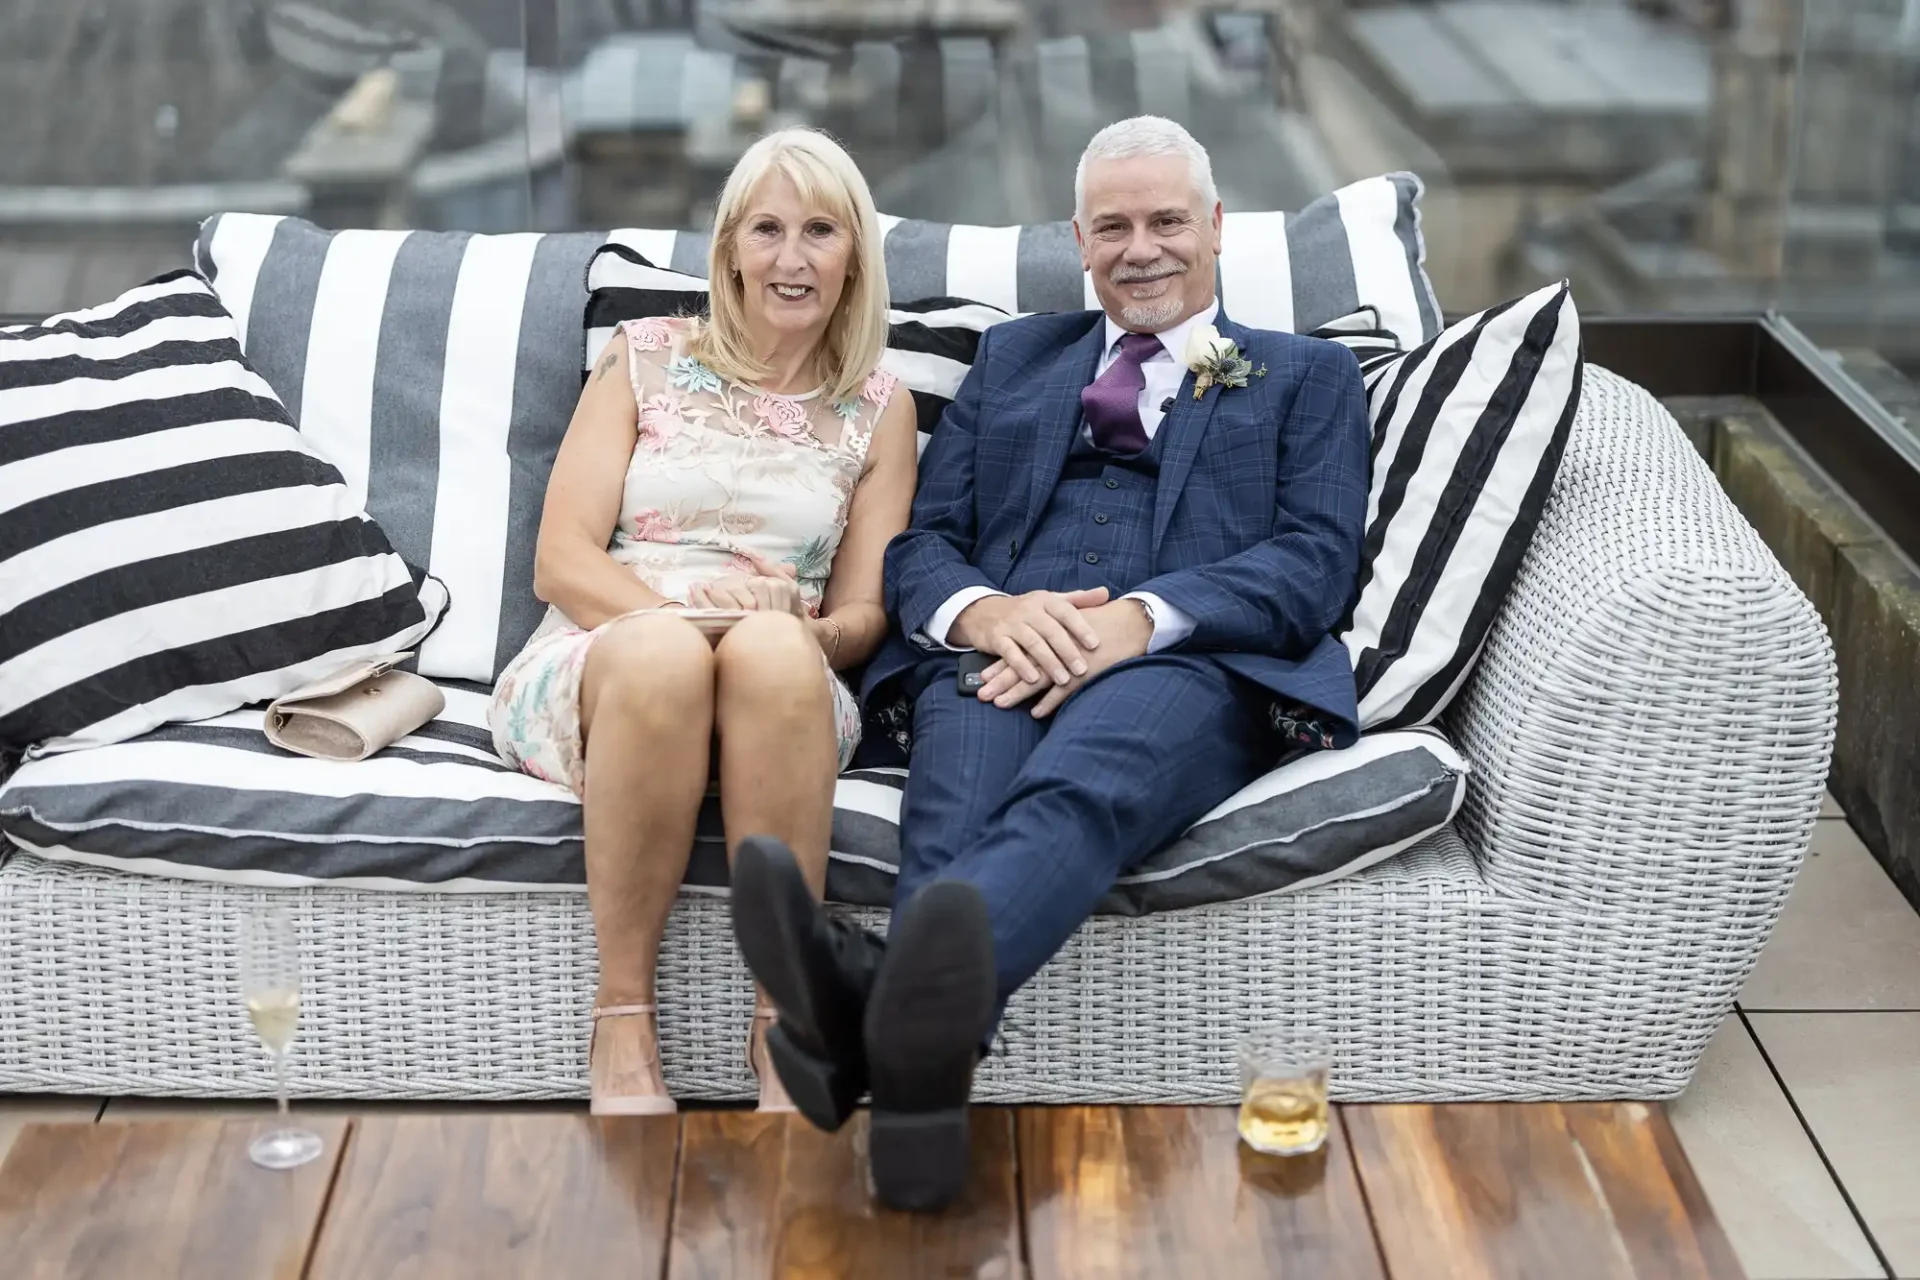 An older couple dressed in formal attire smiles while sitting closely together on a striped sofa, with drinks beside them on an outdoor patio.